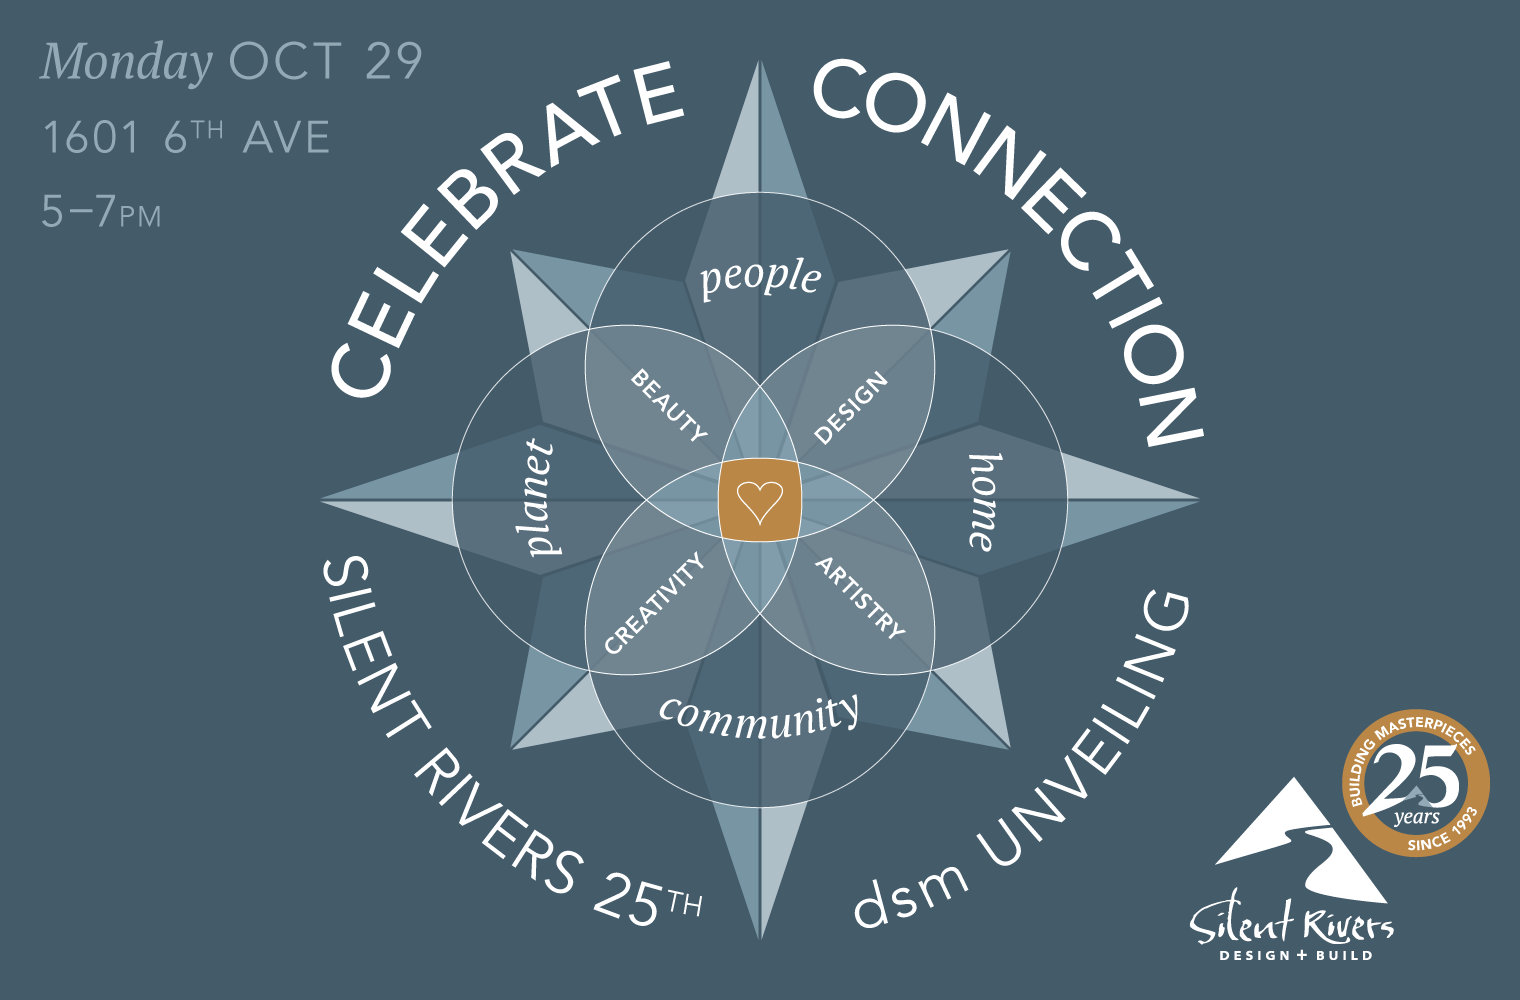 Celebrate Connection: Silent Rivers 25th Anniversary and dsm Unveiling graphic